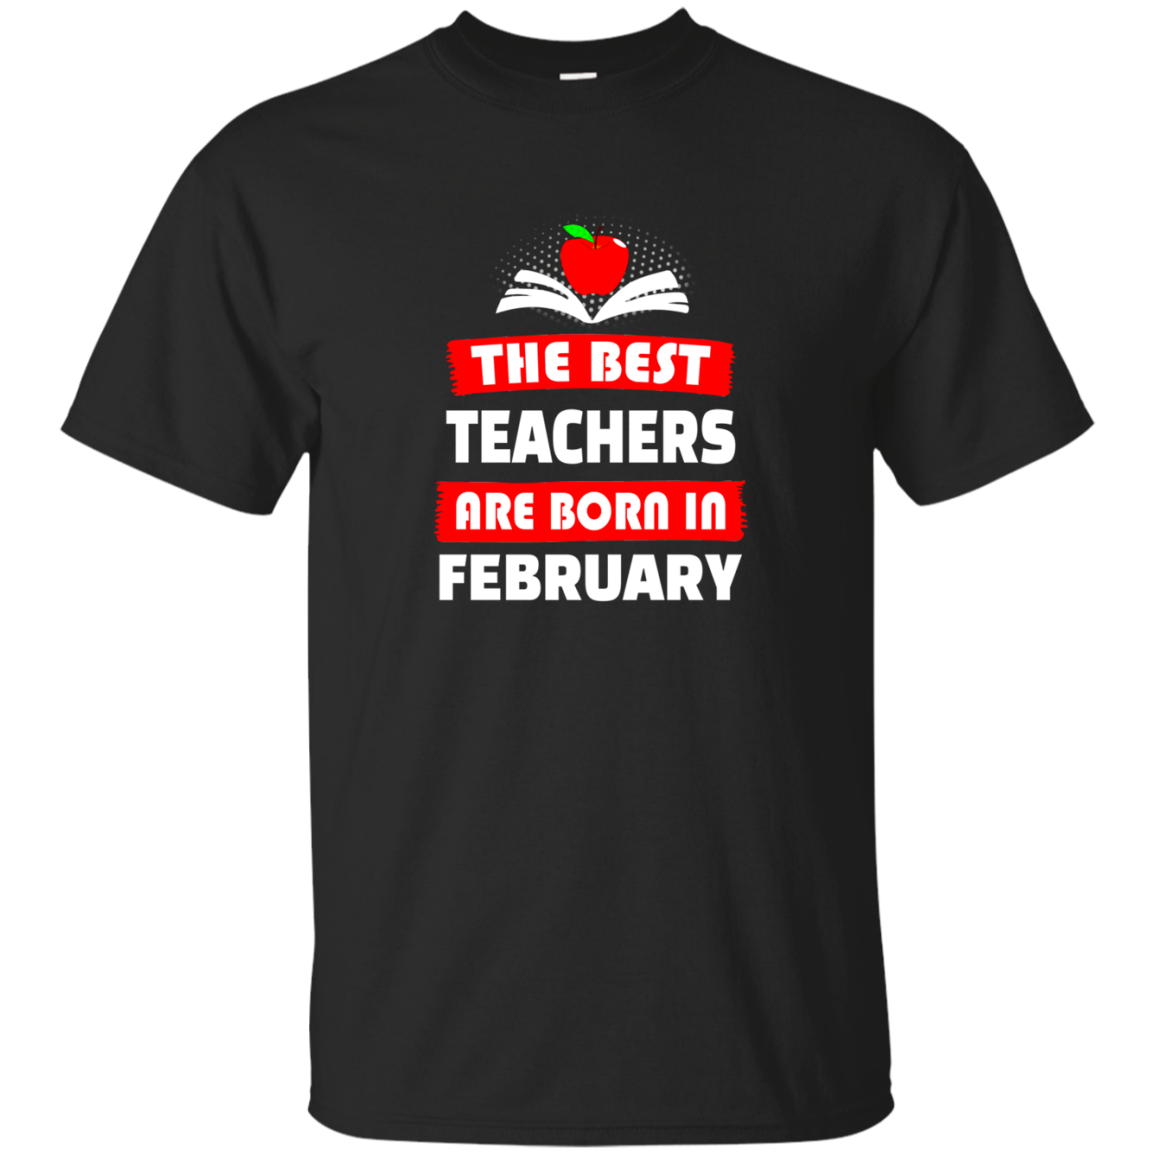 The best teachers are born in February shirt, tank, hoodie